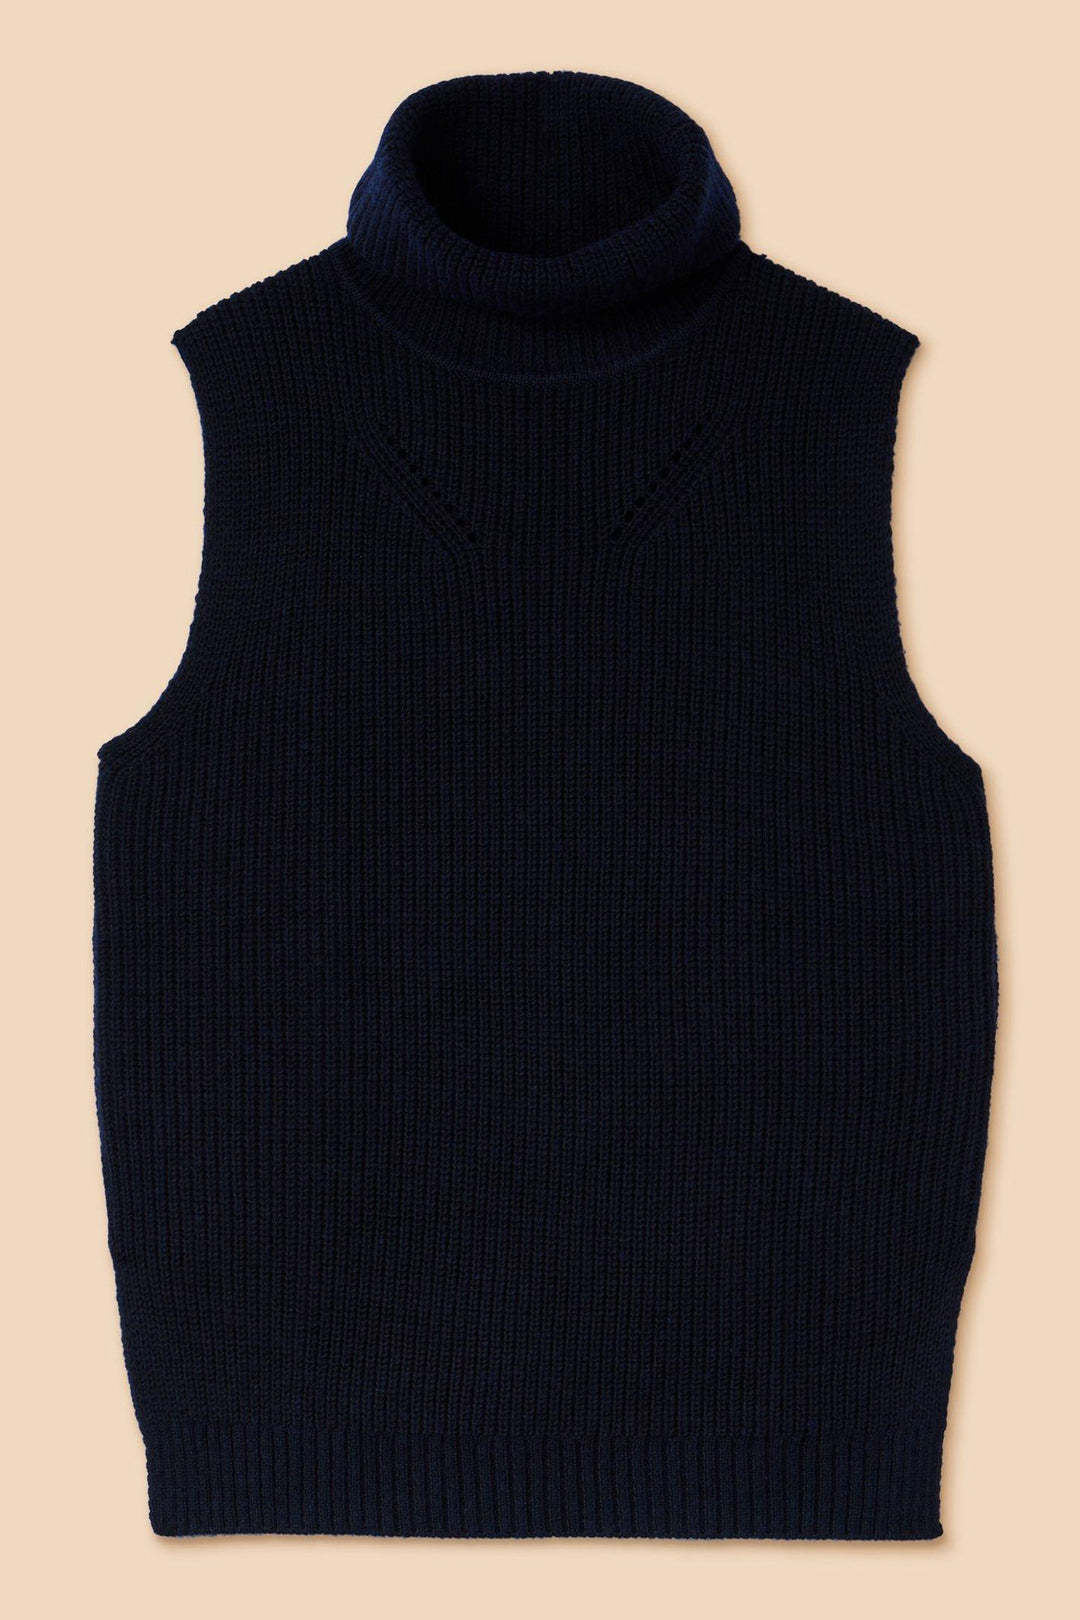 White Stuff 440324 Trixie French Navy Roll Neck Tabard Tank Top - Shirley Allum Boutique